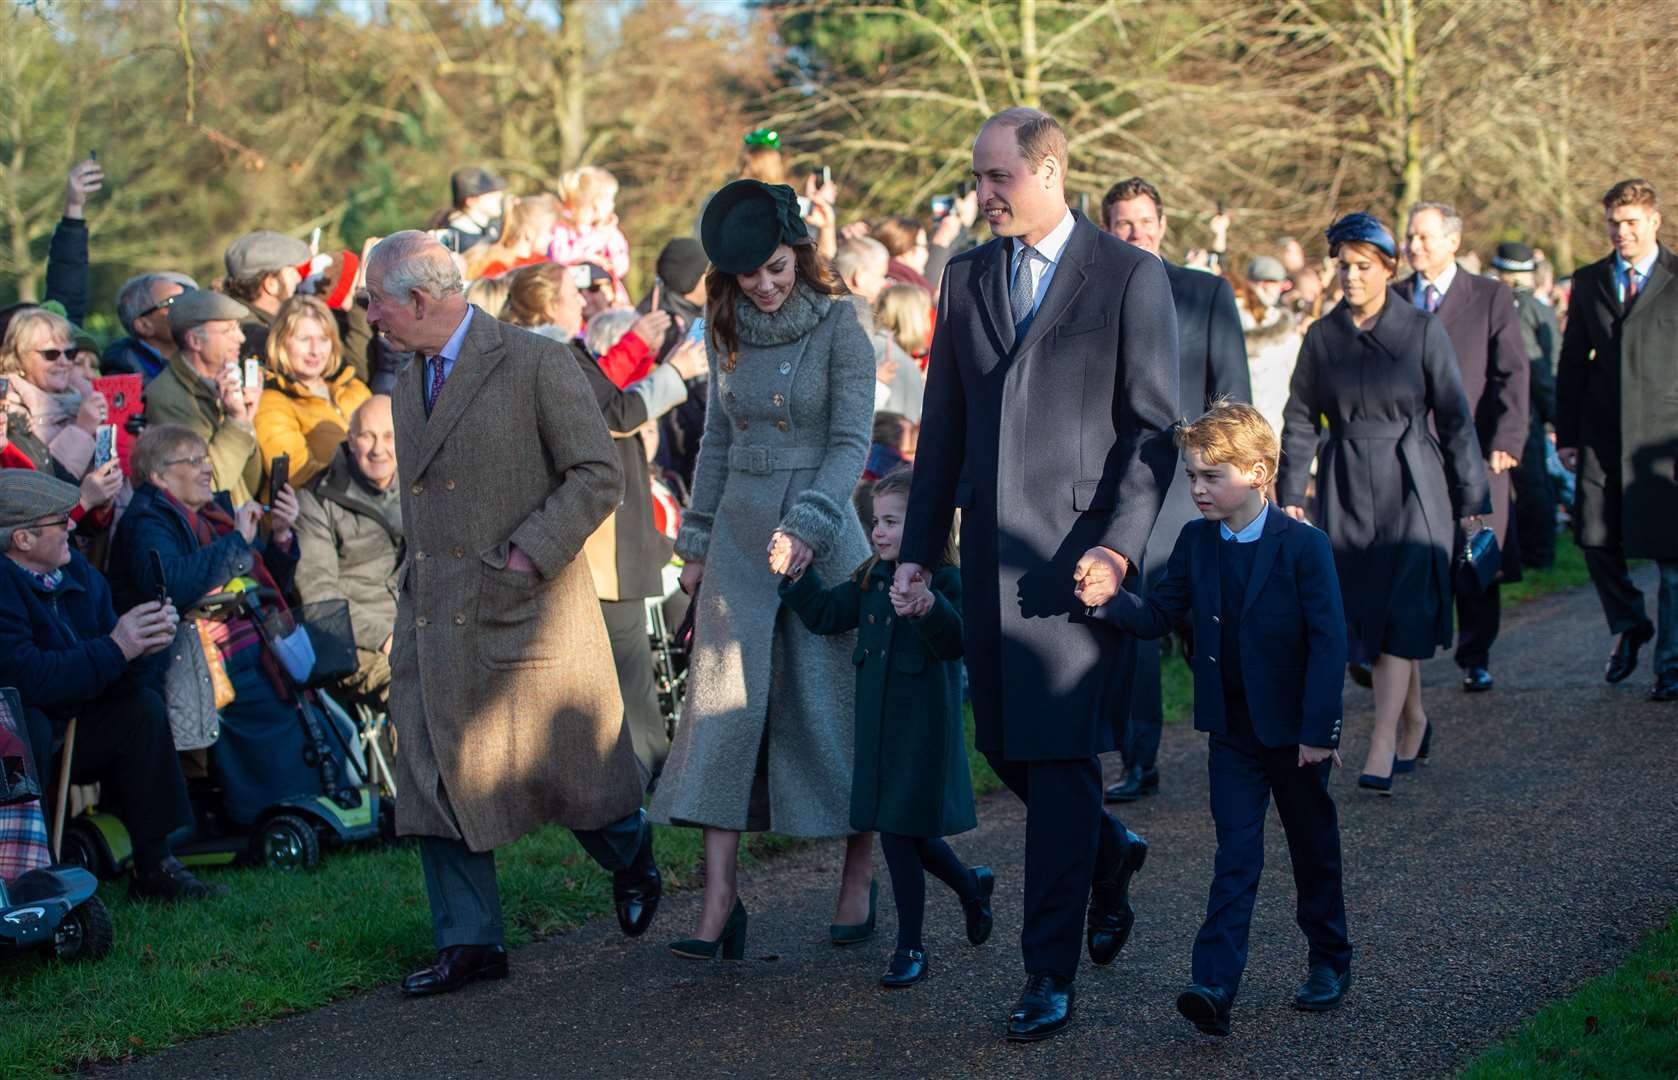 The King with the Prince and Princess of Wales, Prince George and Princess Charlotte arriving for the Christmas Day morning service at St Mary Magdalene Church in Sandringham in 2019 (Joe Giddens/PA)